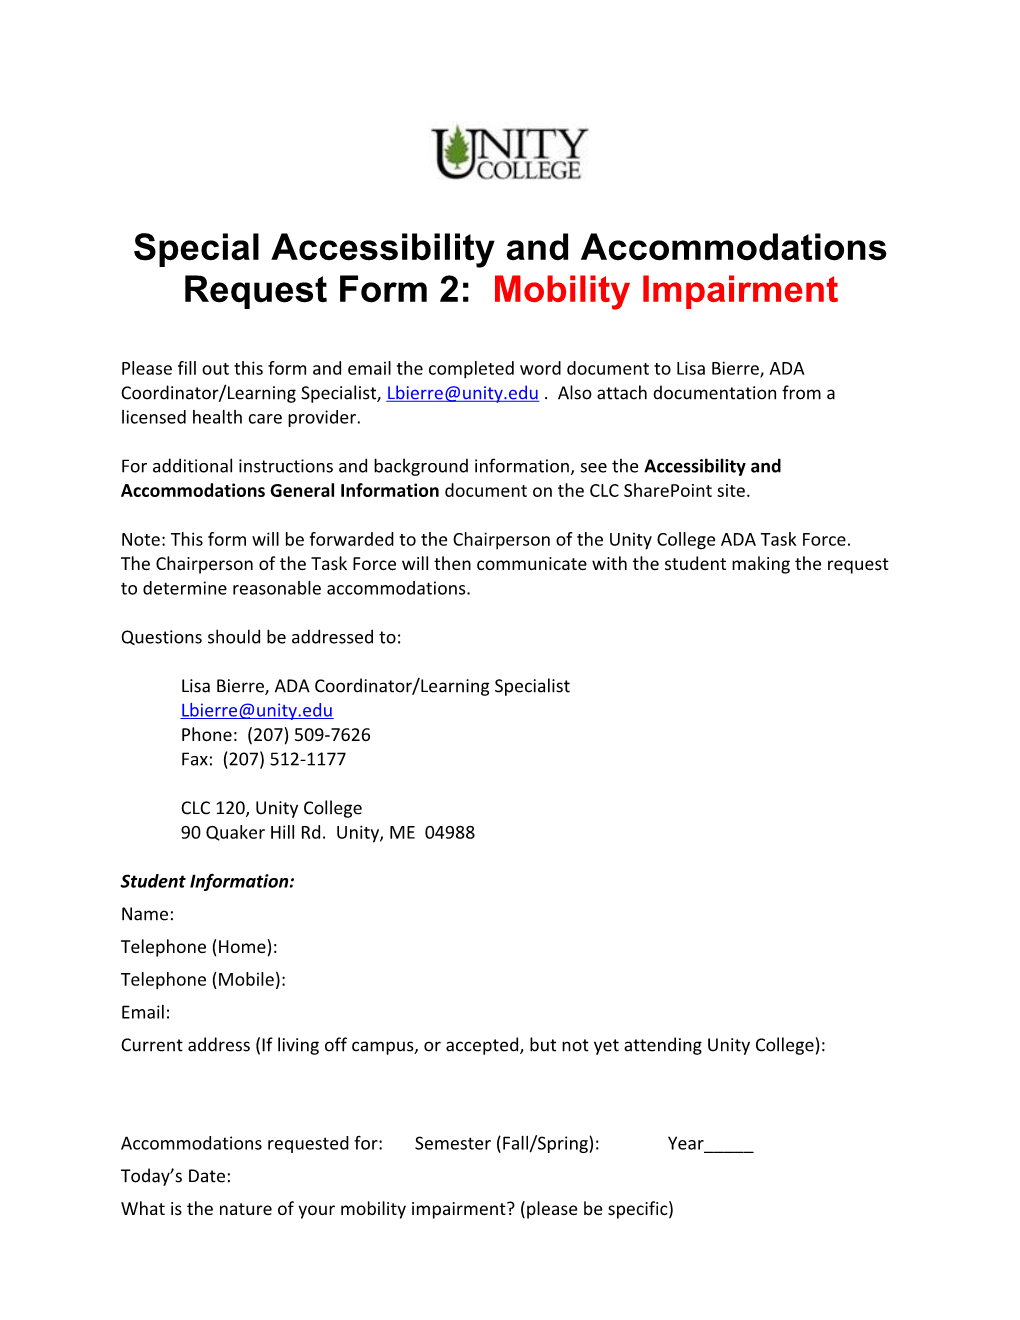 Special Accessibility and Accommodations Request Form 2: Mobility Impairment